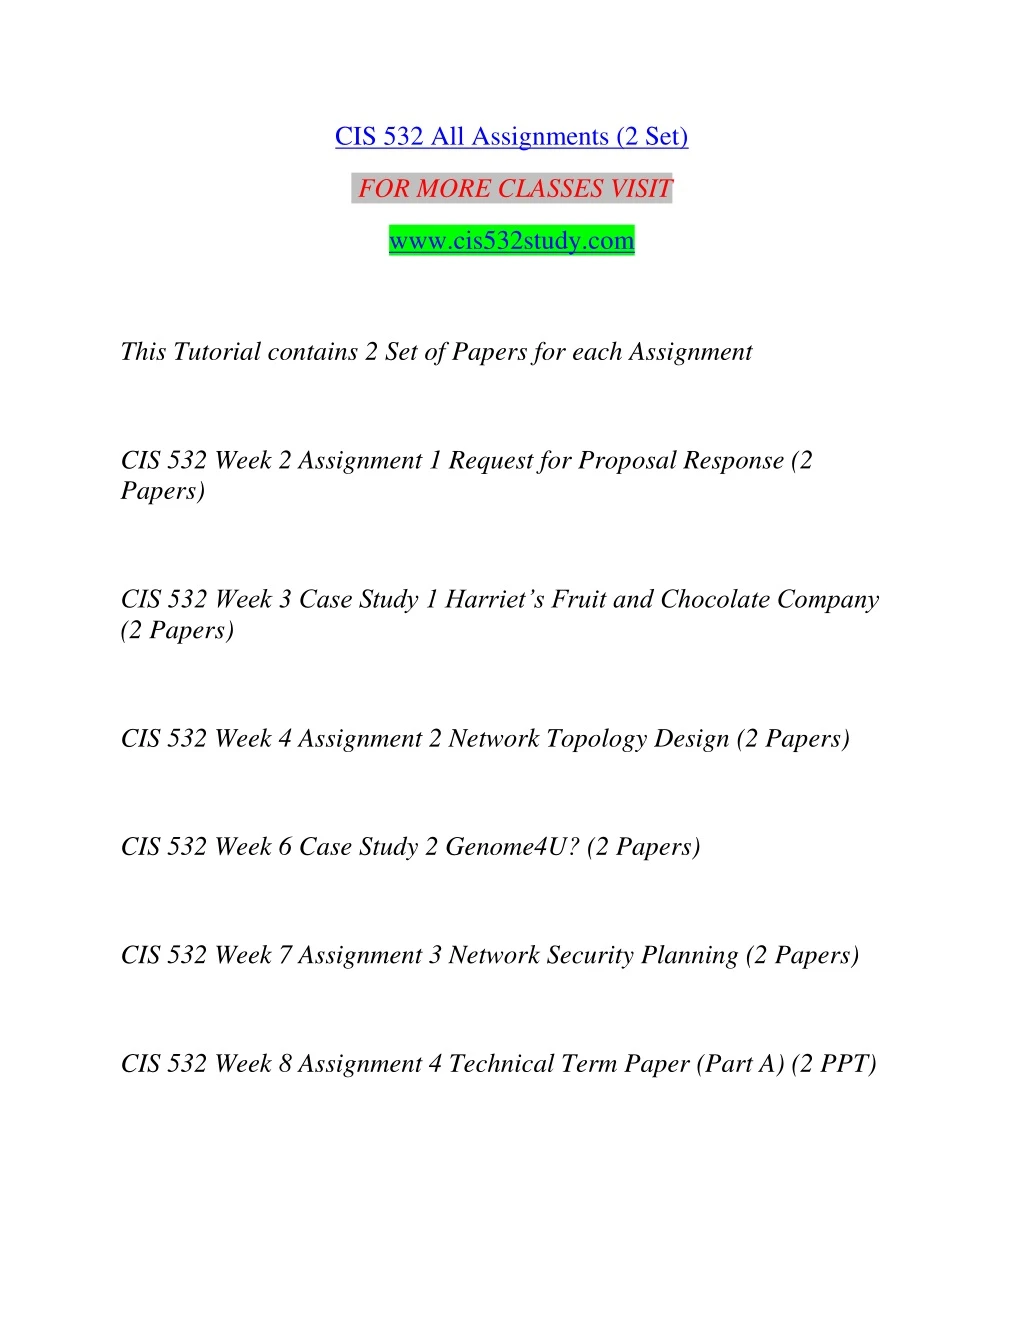 cis 532 all assignments 2 set